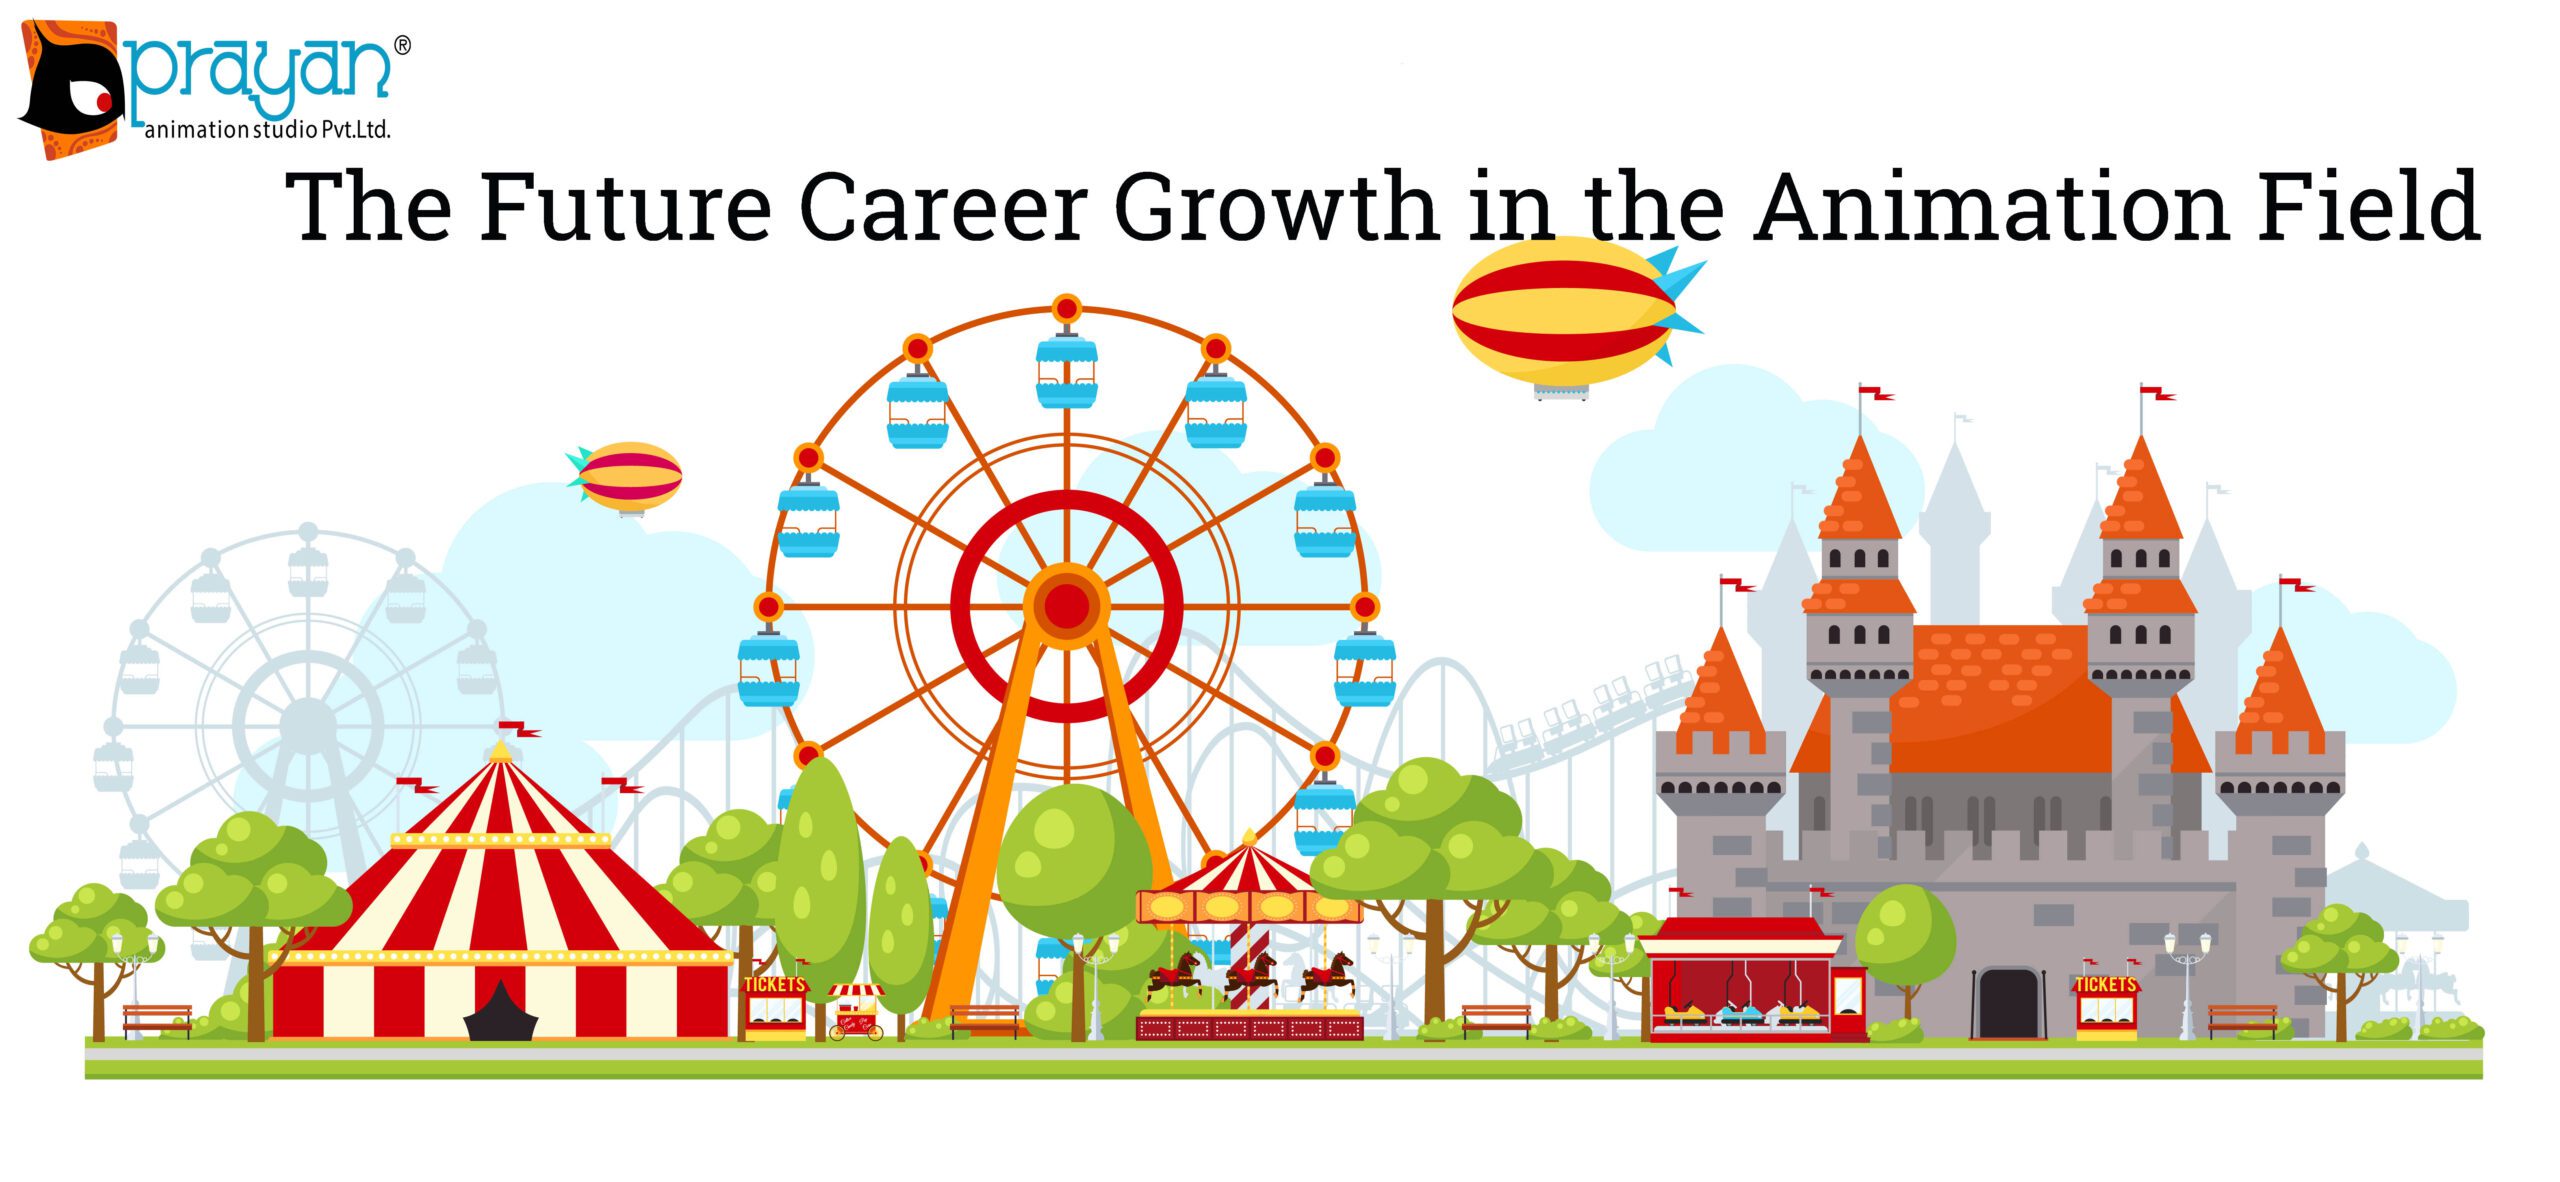 The Future Career Growth in the Animation Field